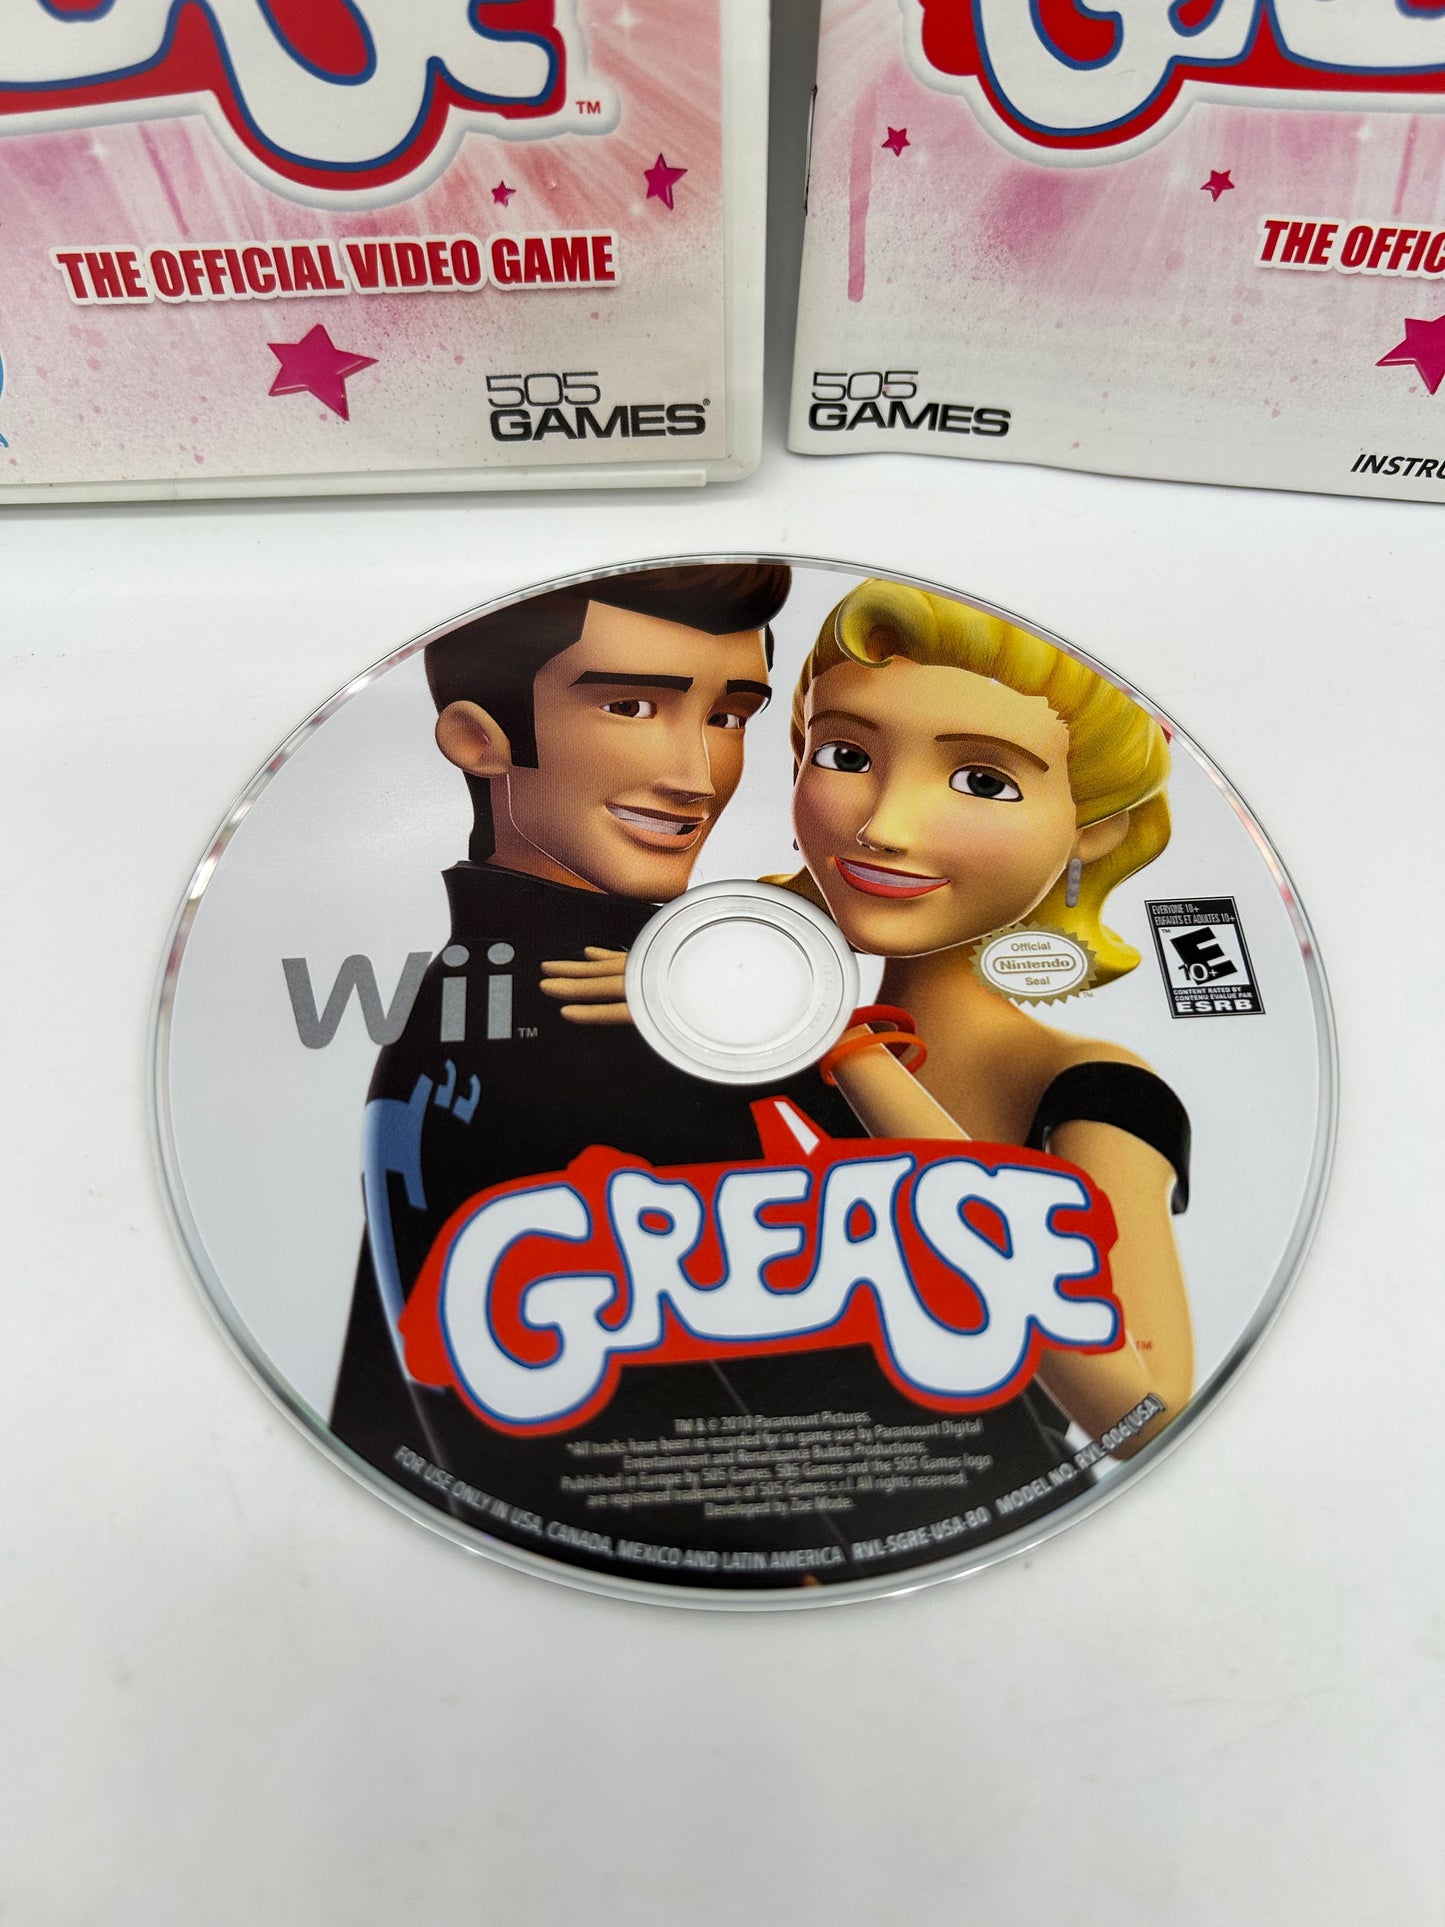 NiNTENDO Wii | GREASE THE OFFiCiAL ViDEO GAME